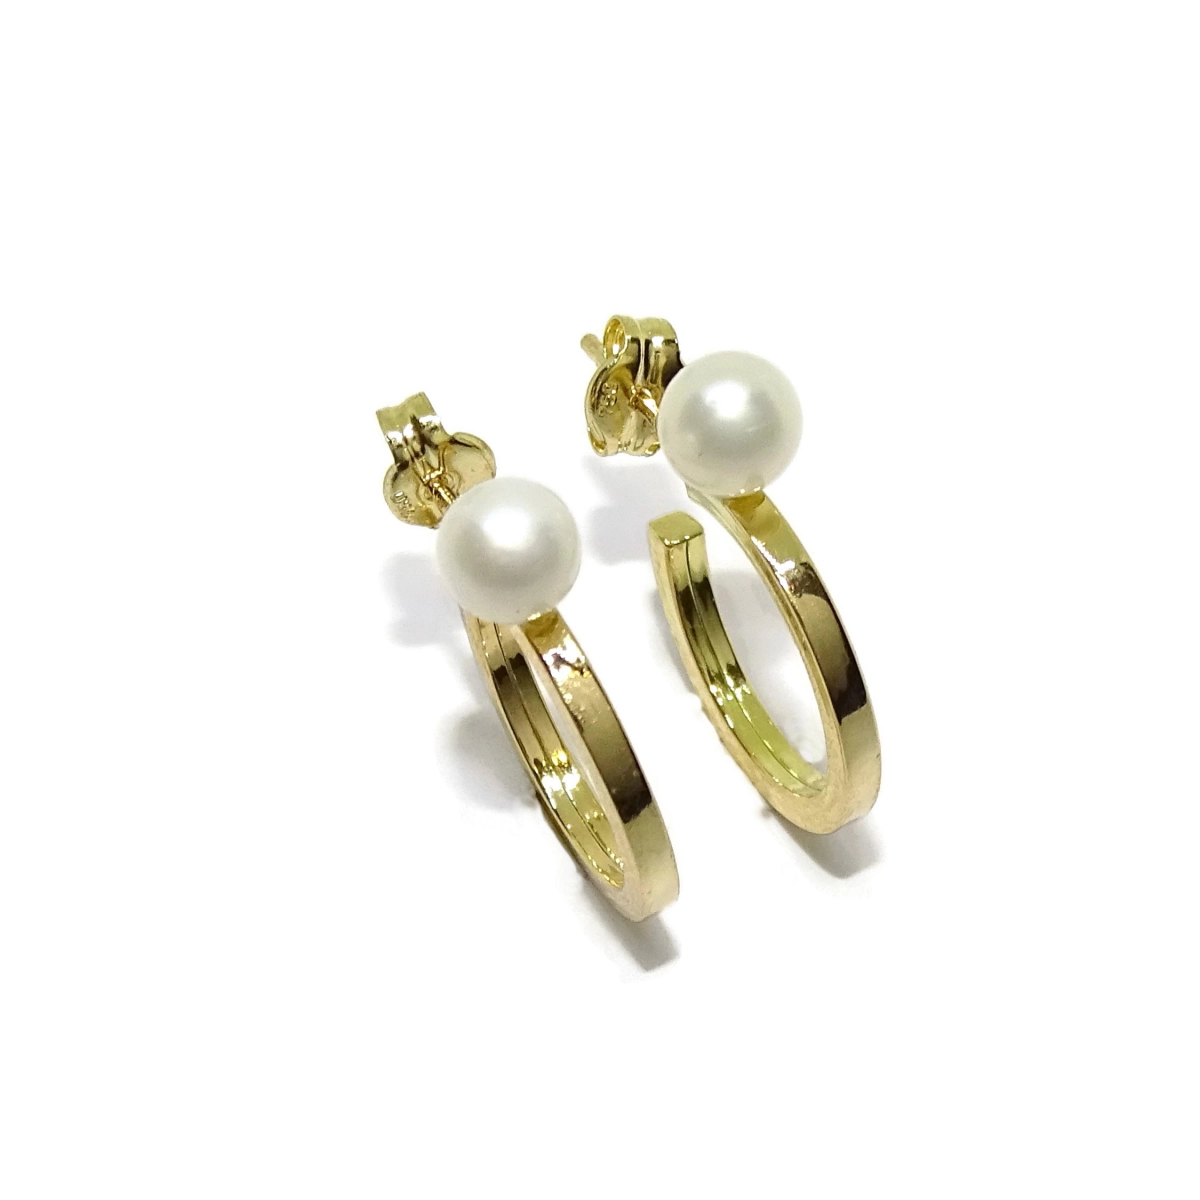 EARRINGS TYPE HOOP OF 18K YELLOW GOLD WITH 2 CULTURED PEARLS NEVER SAY NEVER